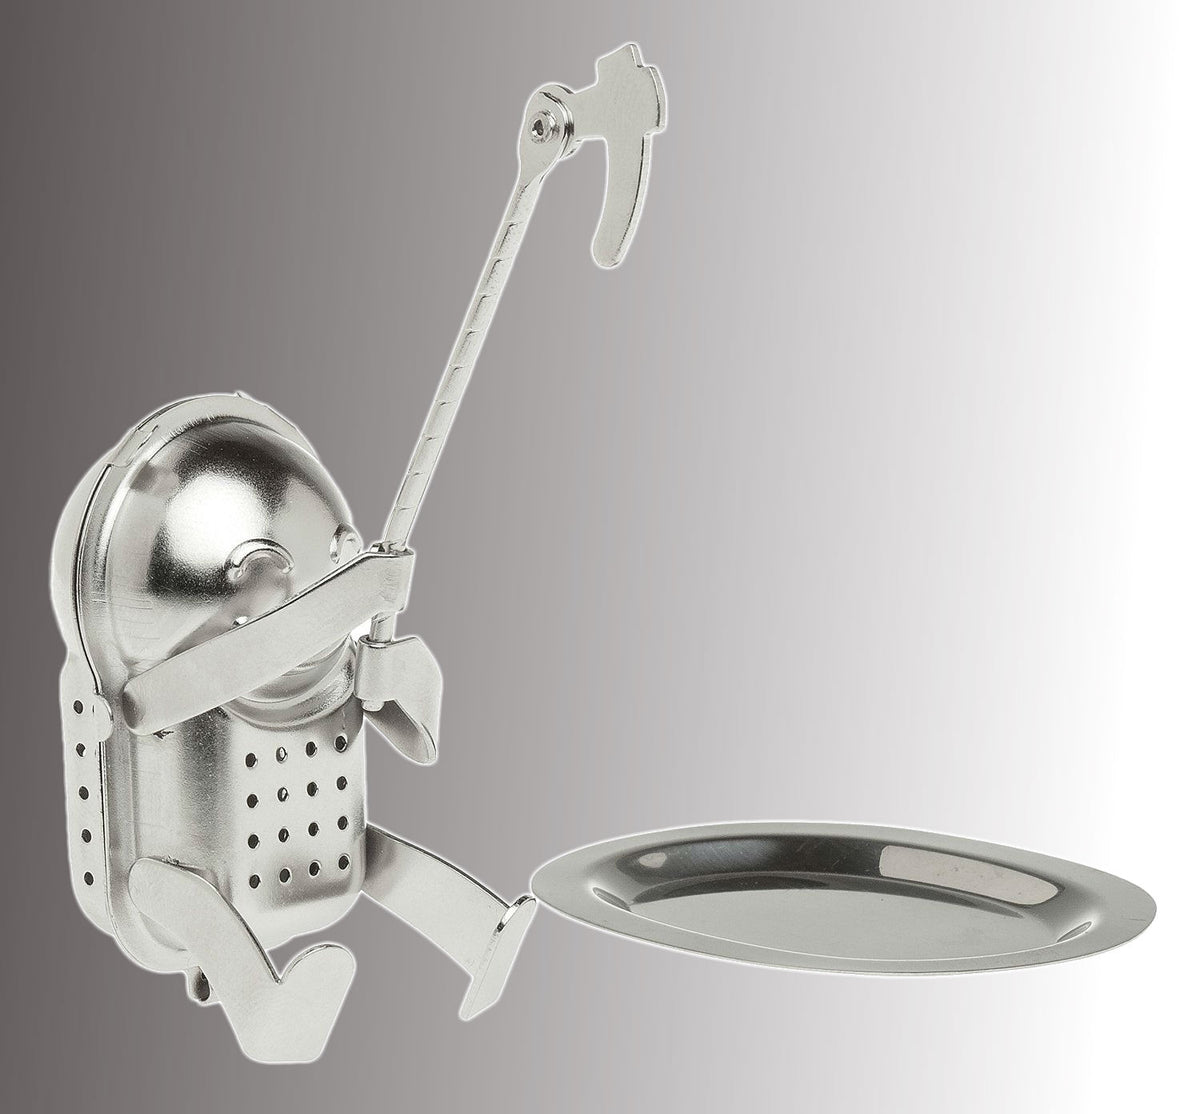 HIC 93244 Rock Climber Tea Infuser With Drip Tray, Stainless Steel, 3.05"X2-1/4"